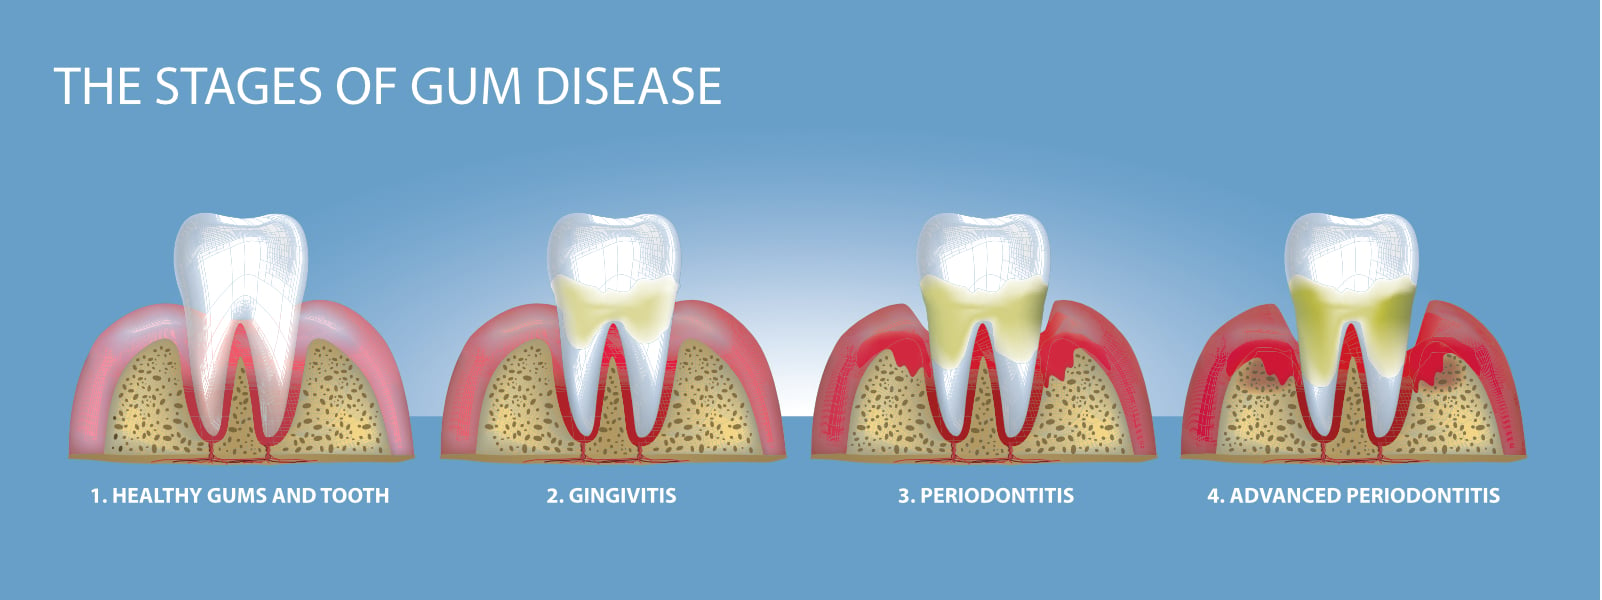 Early Detection and Treatment of Gum Disease